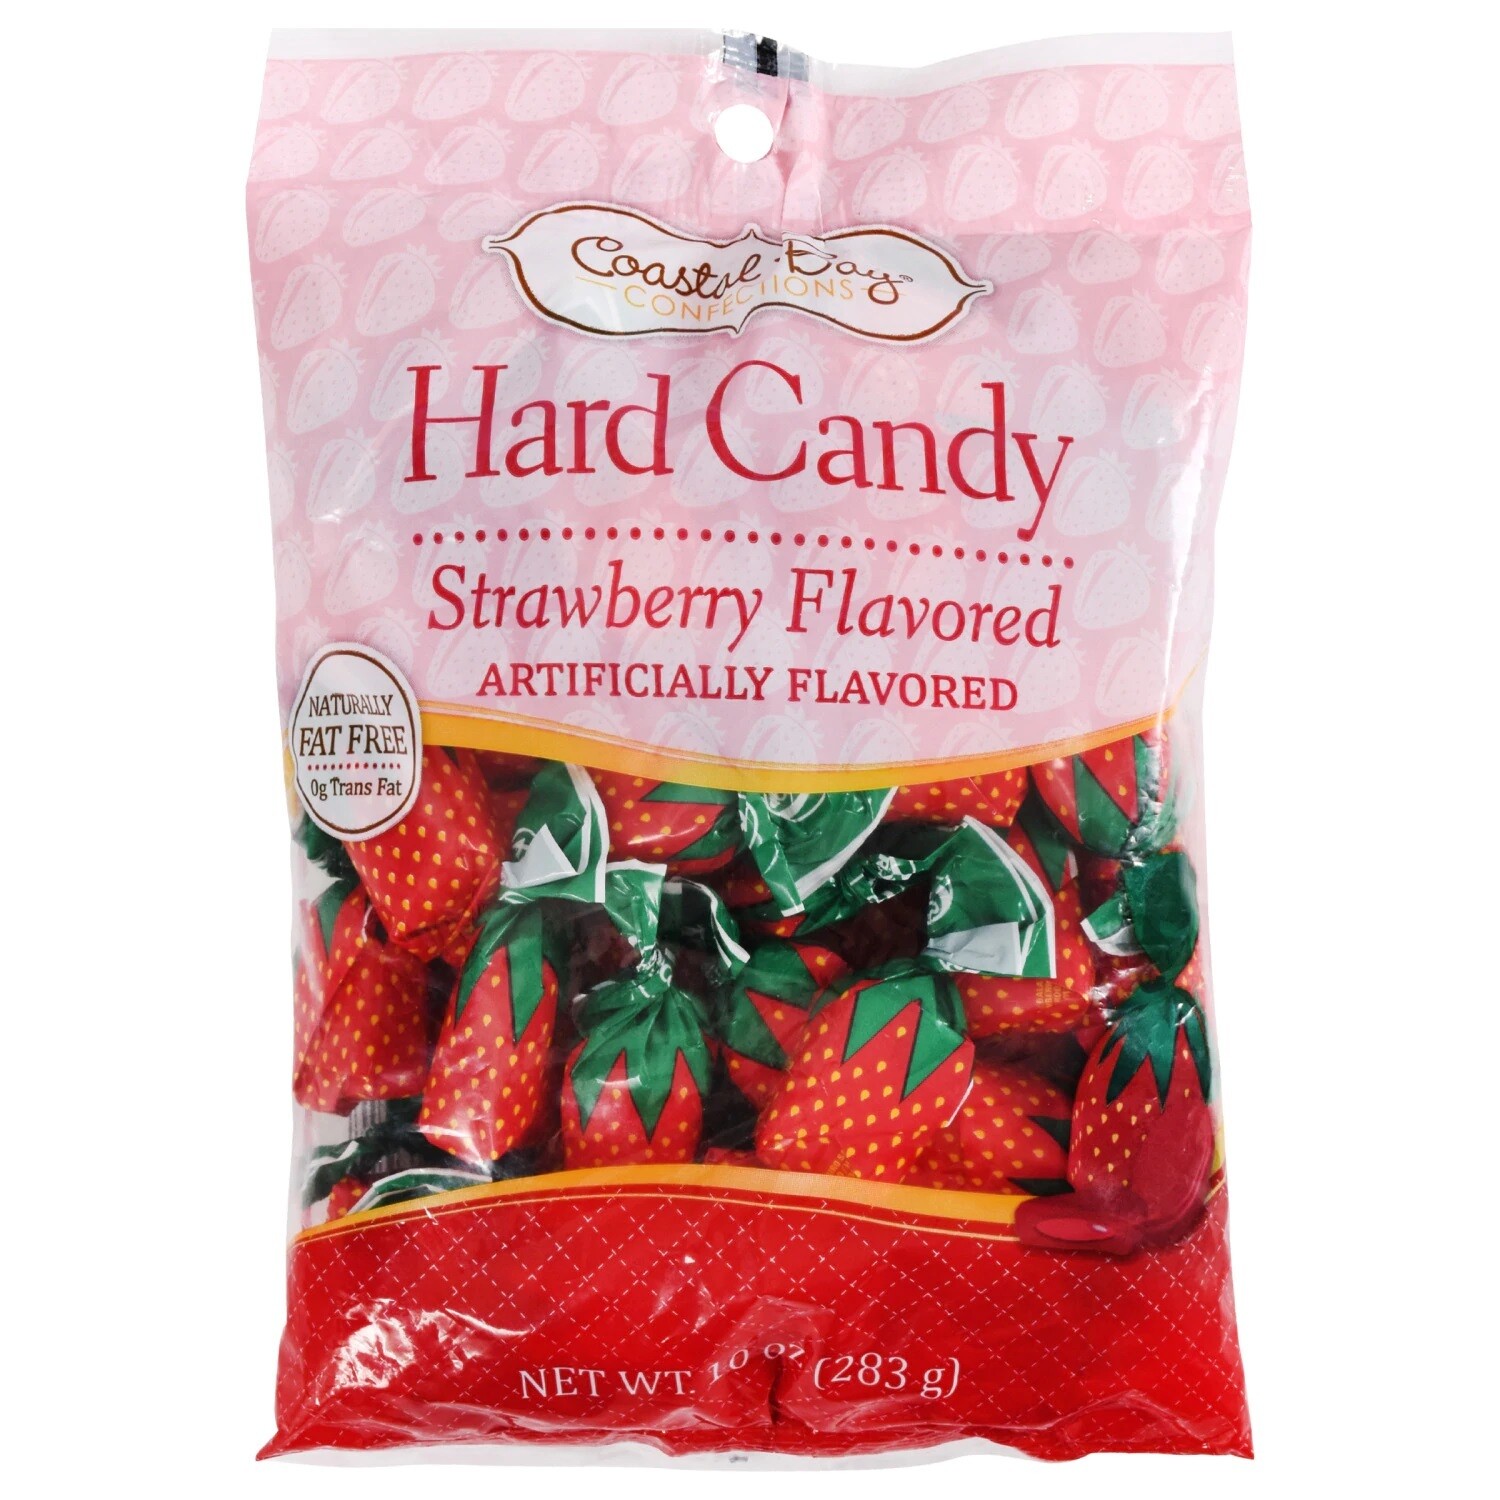 Hard Candy     Strawberry Flavored